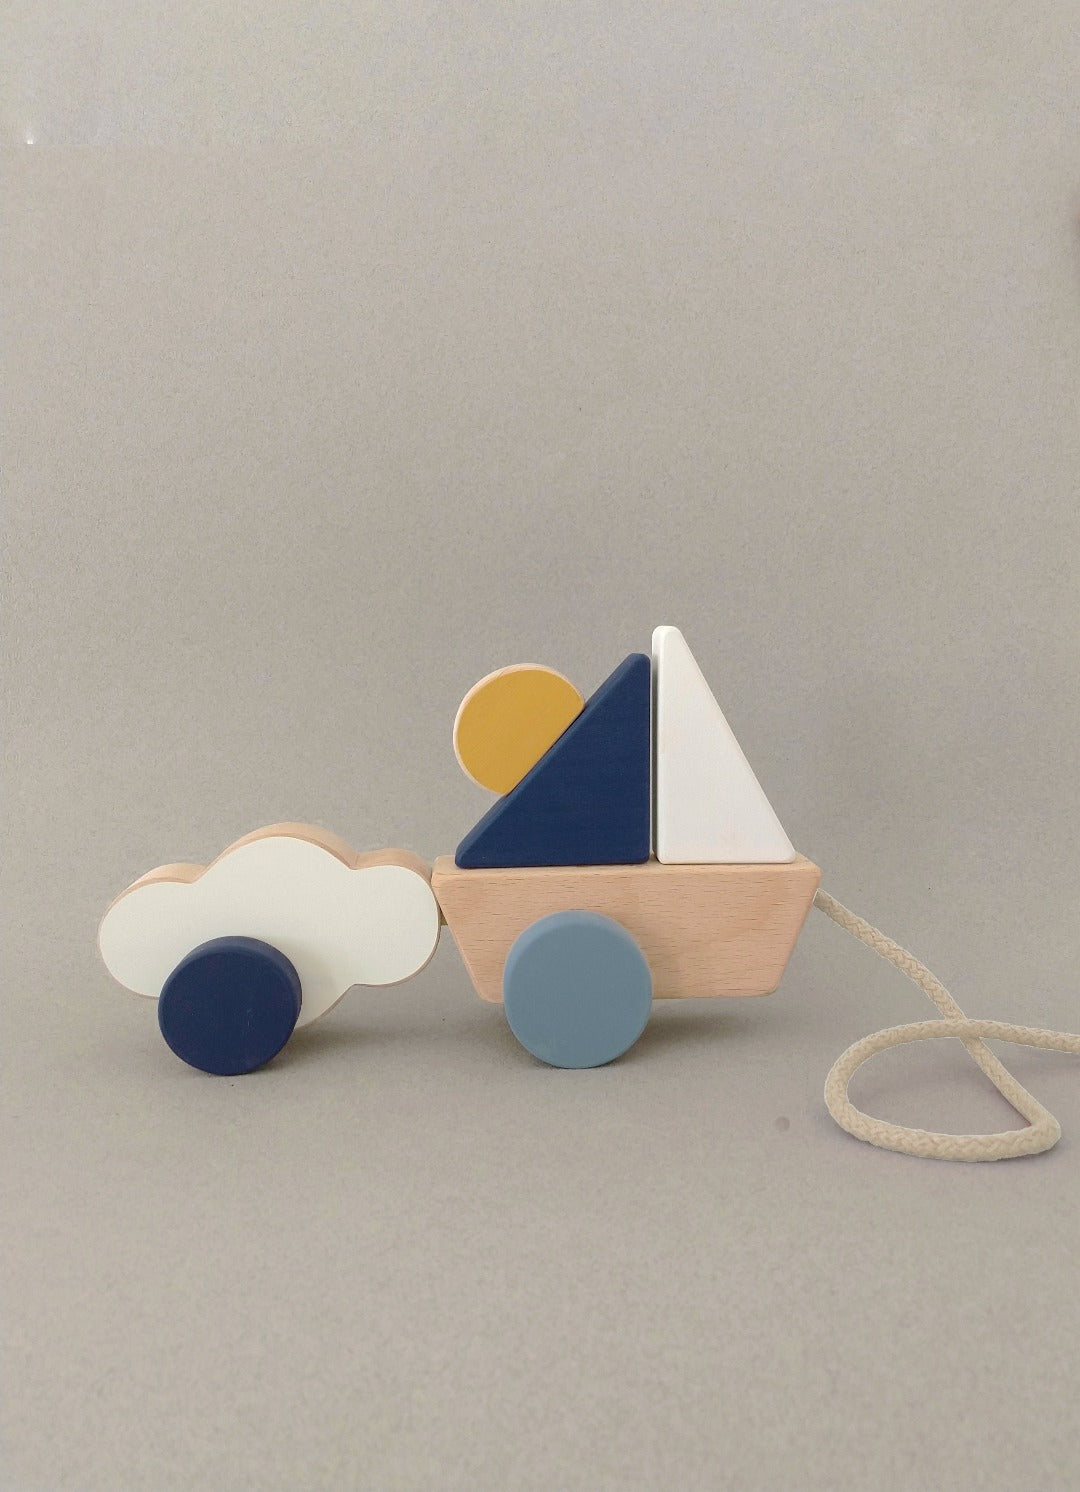 A well-traveled wooden toy boat for little dreamers and imaginative play.